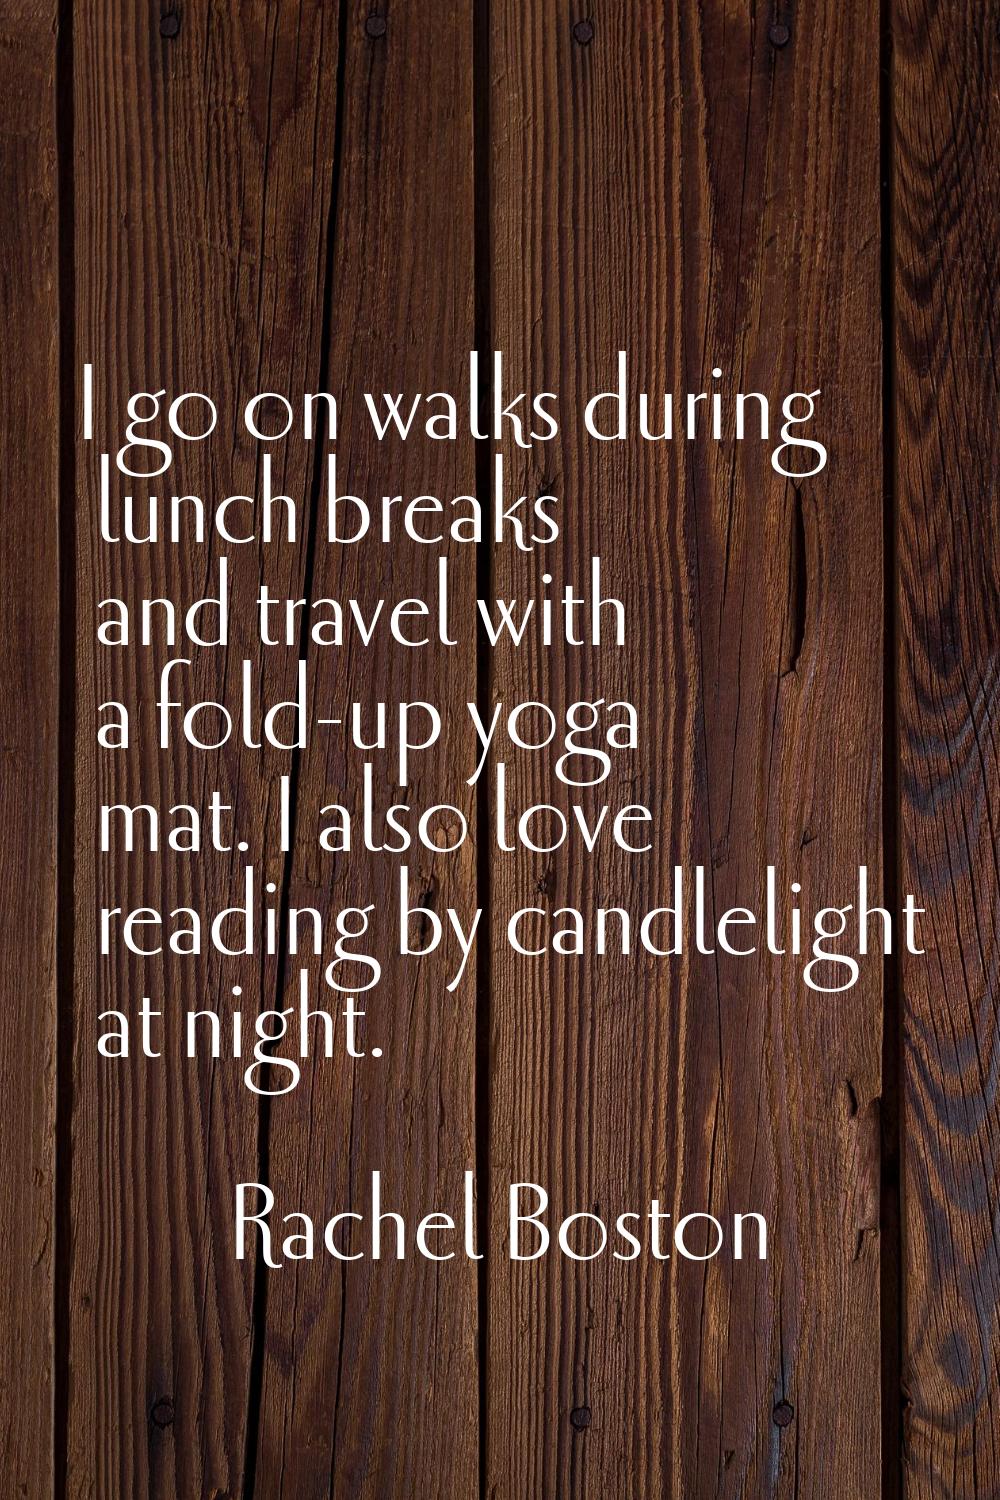 I go on walks during lunch breaks and travel with a fold-up yoga mat. I also love reading by candle